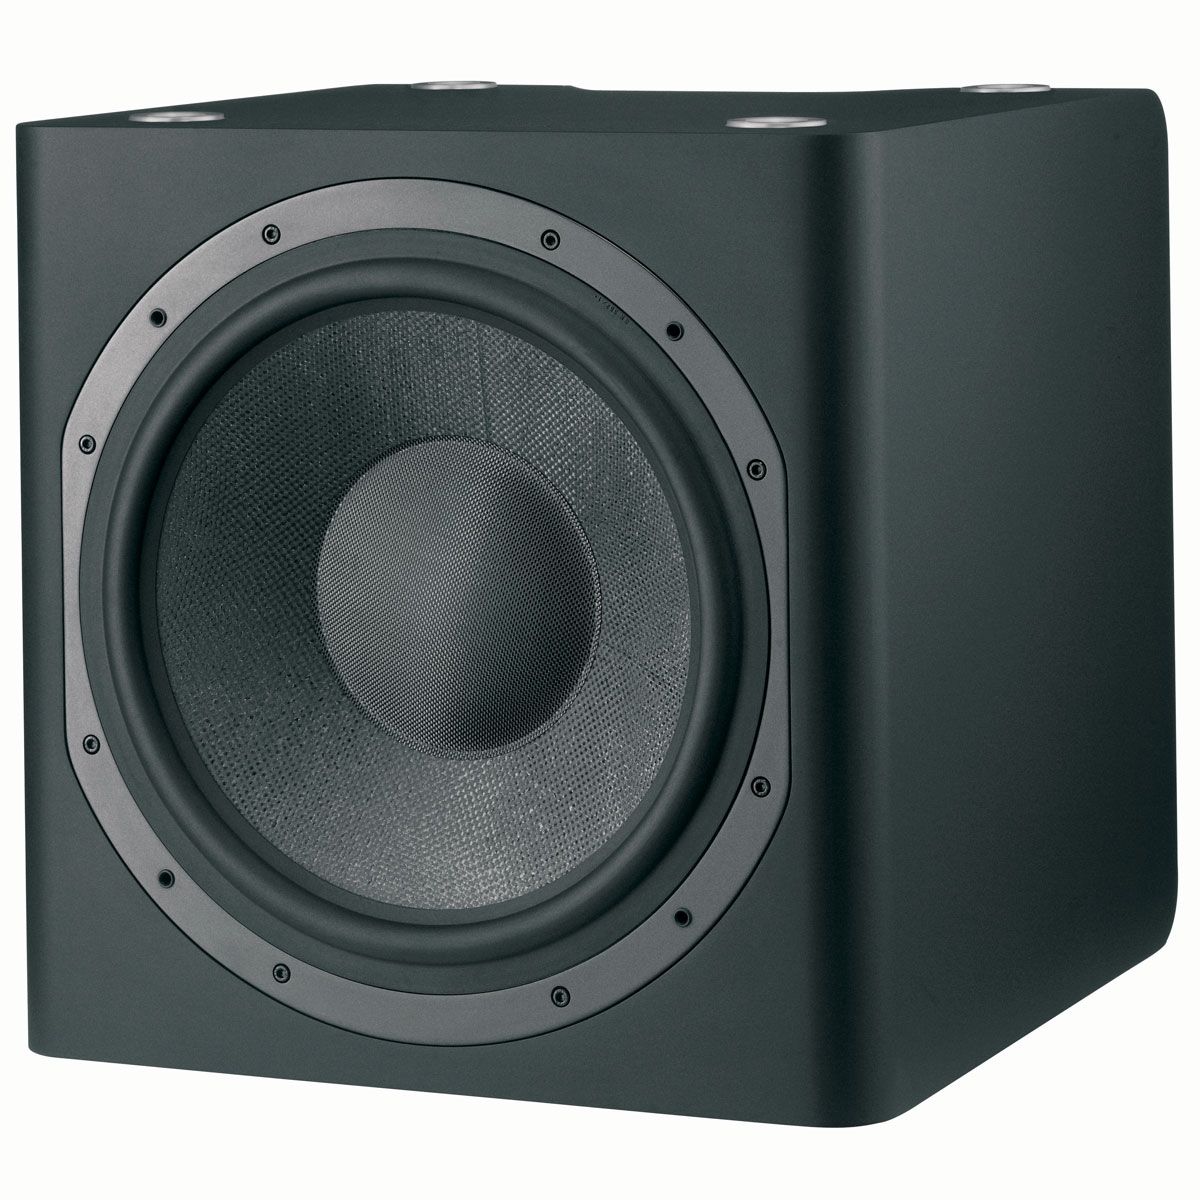 Bowers & Wilkins CT8 SW Closed-Box Subwoofer